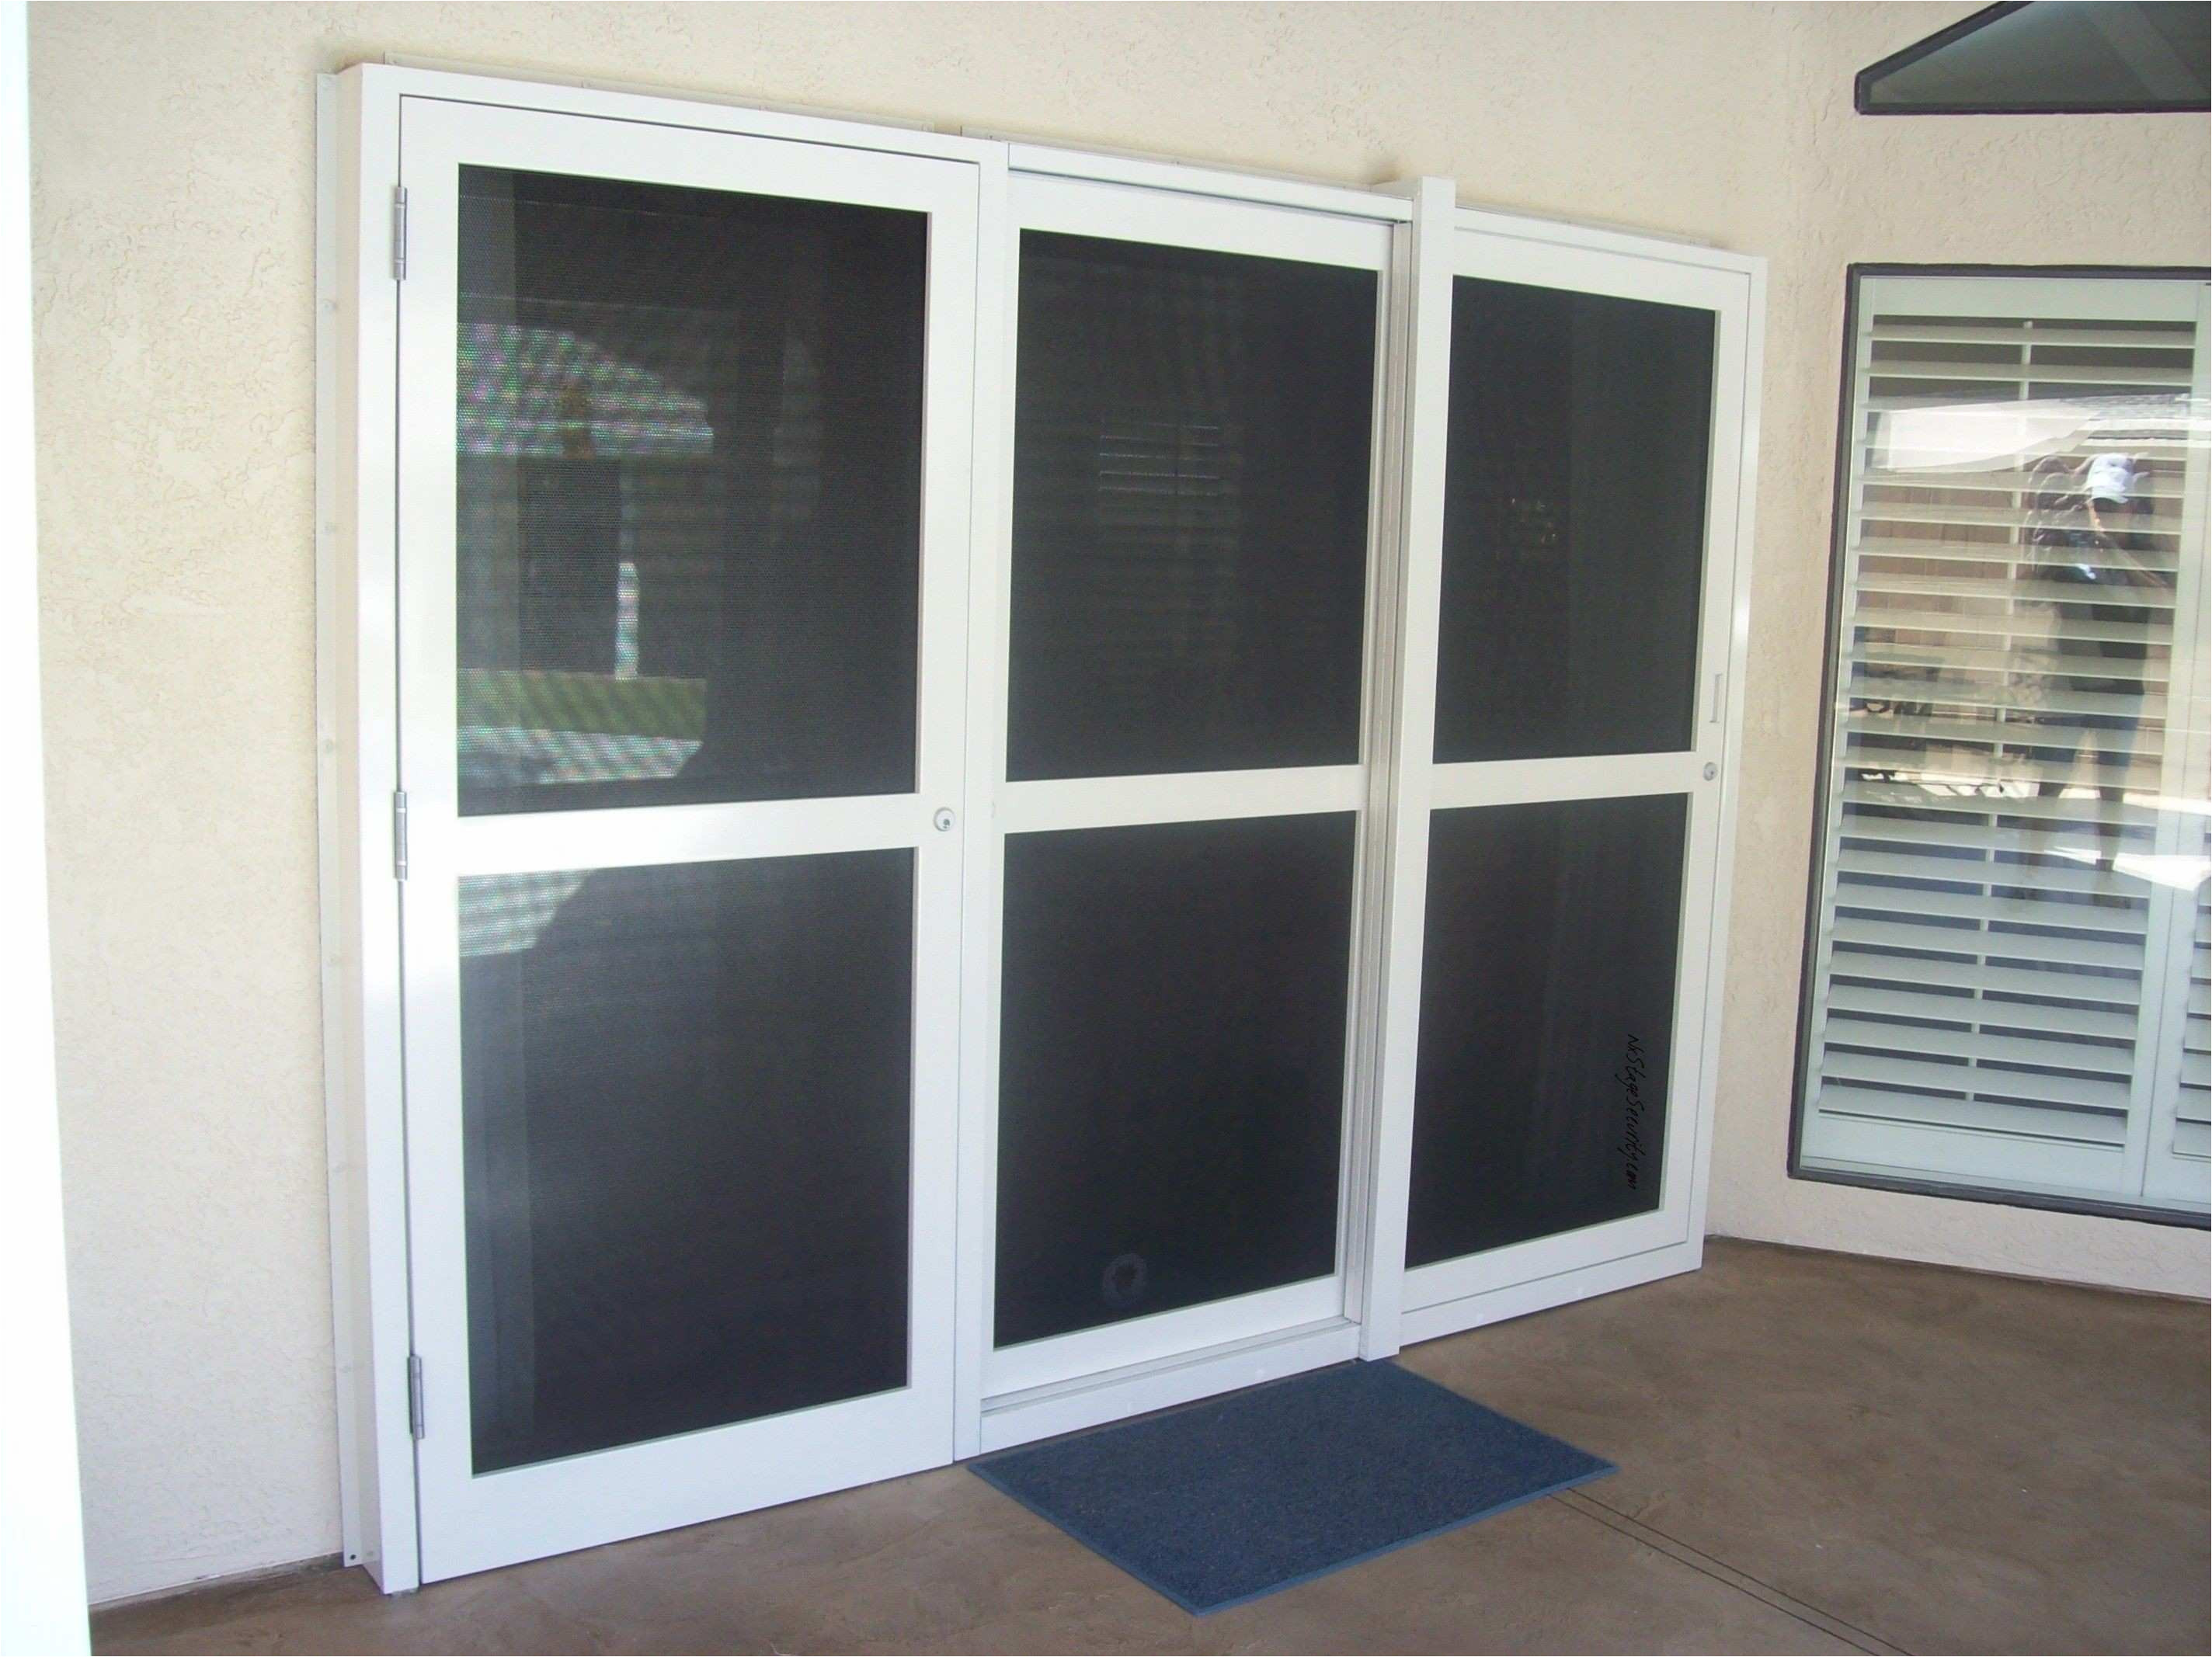 fetching patio door blinds lowes in adorable sliding patio doors lowes with 28 stunning lowes sliding